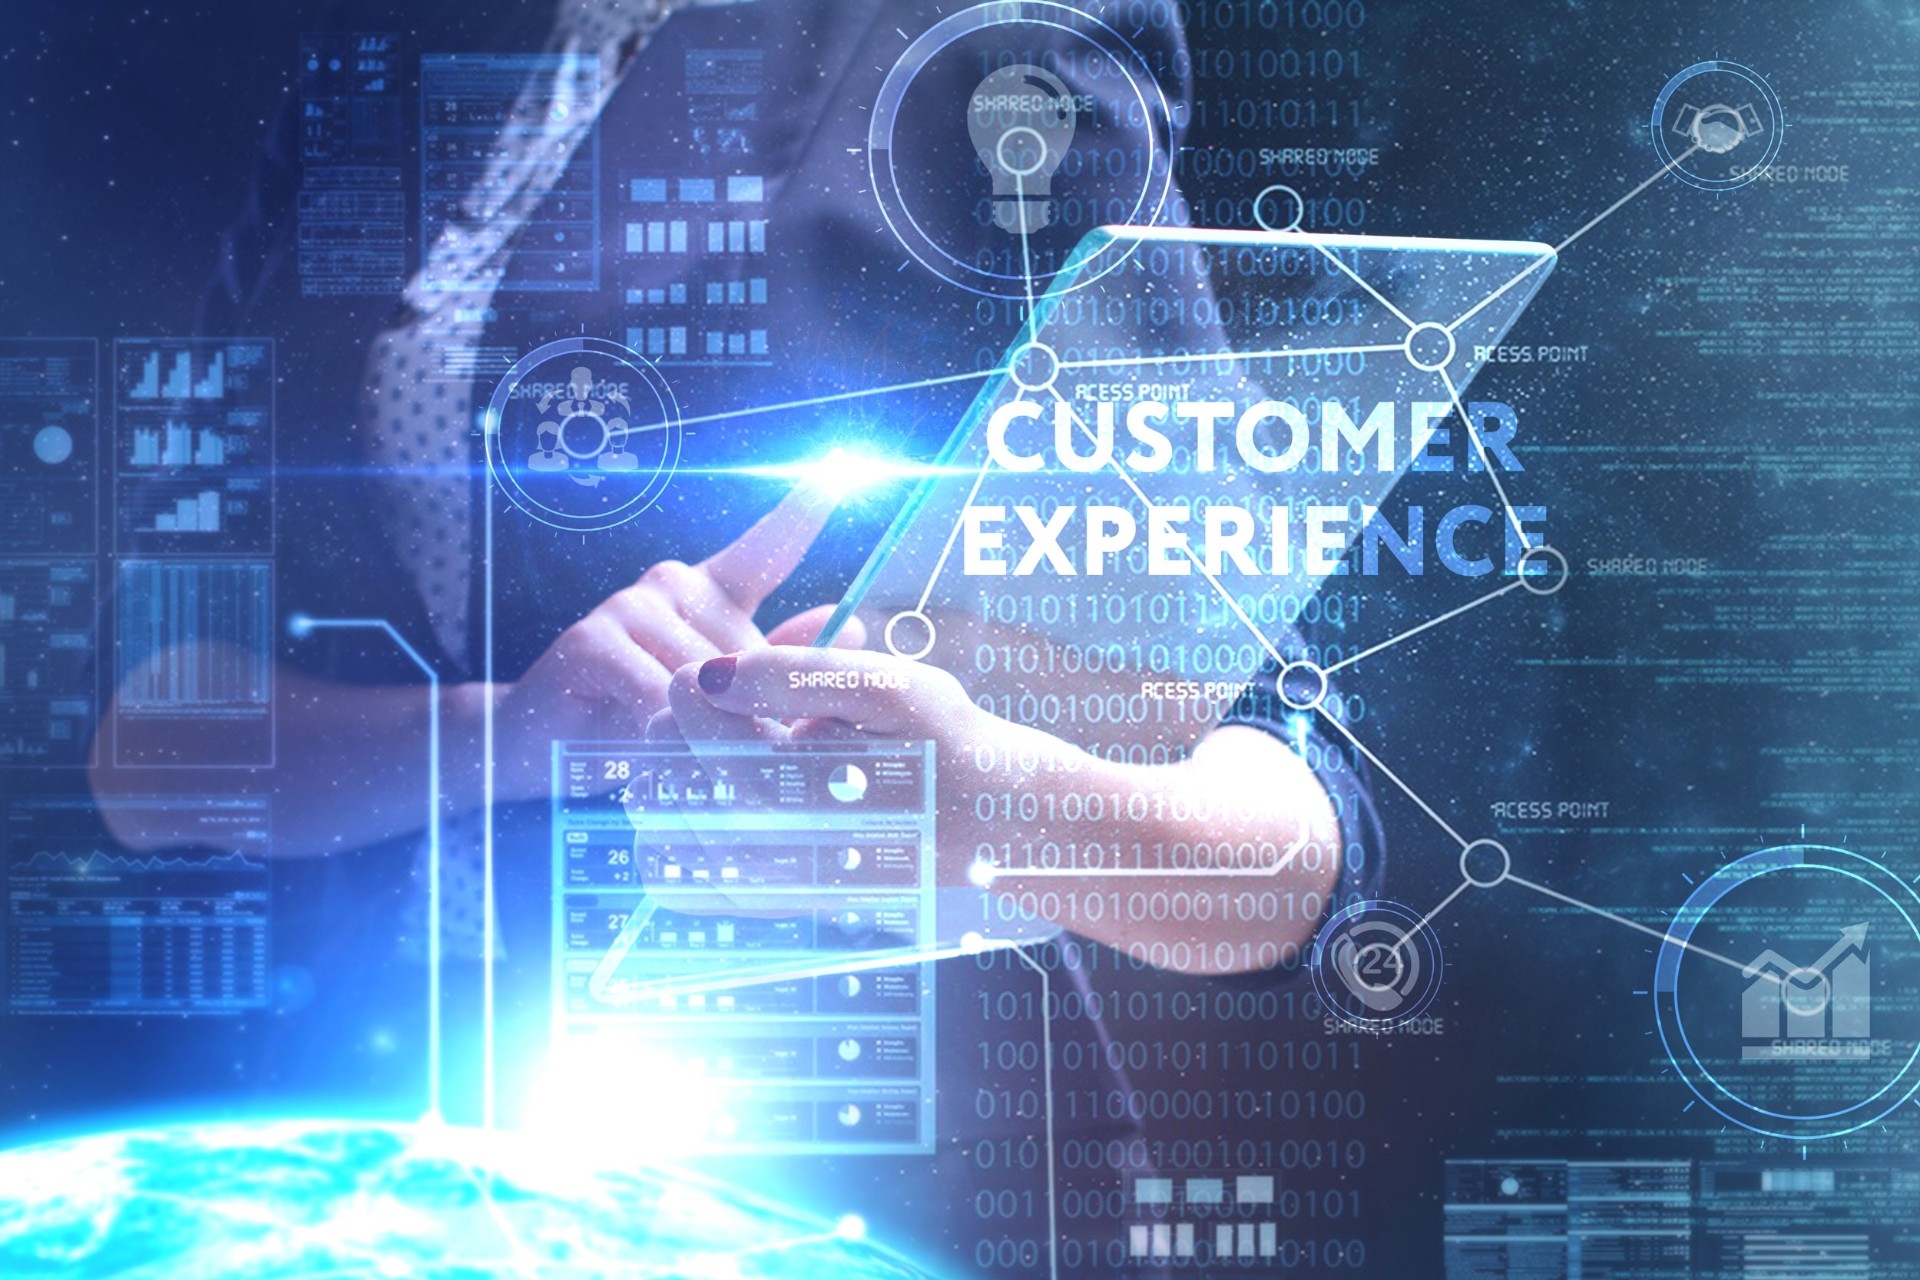 Building an industrial-strength customer experience